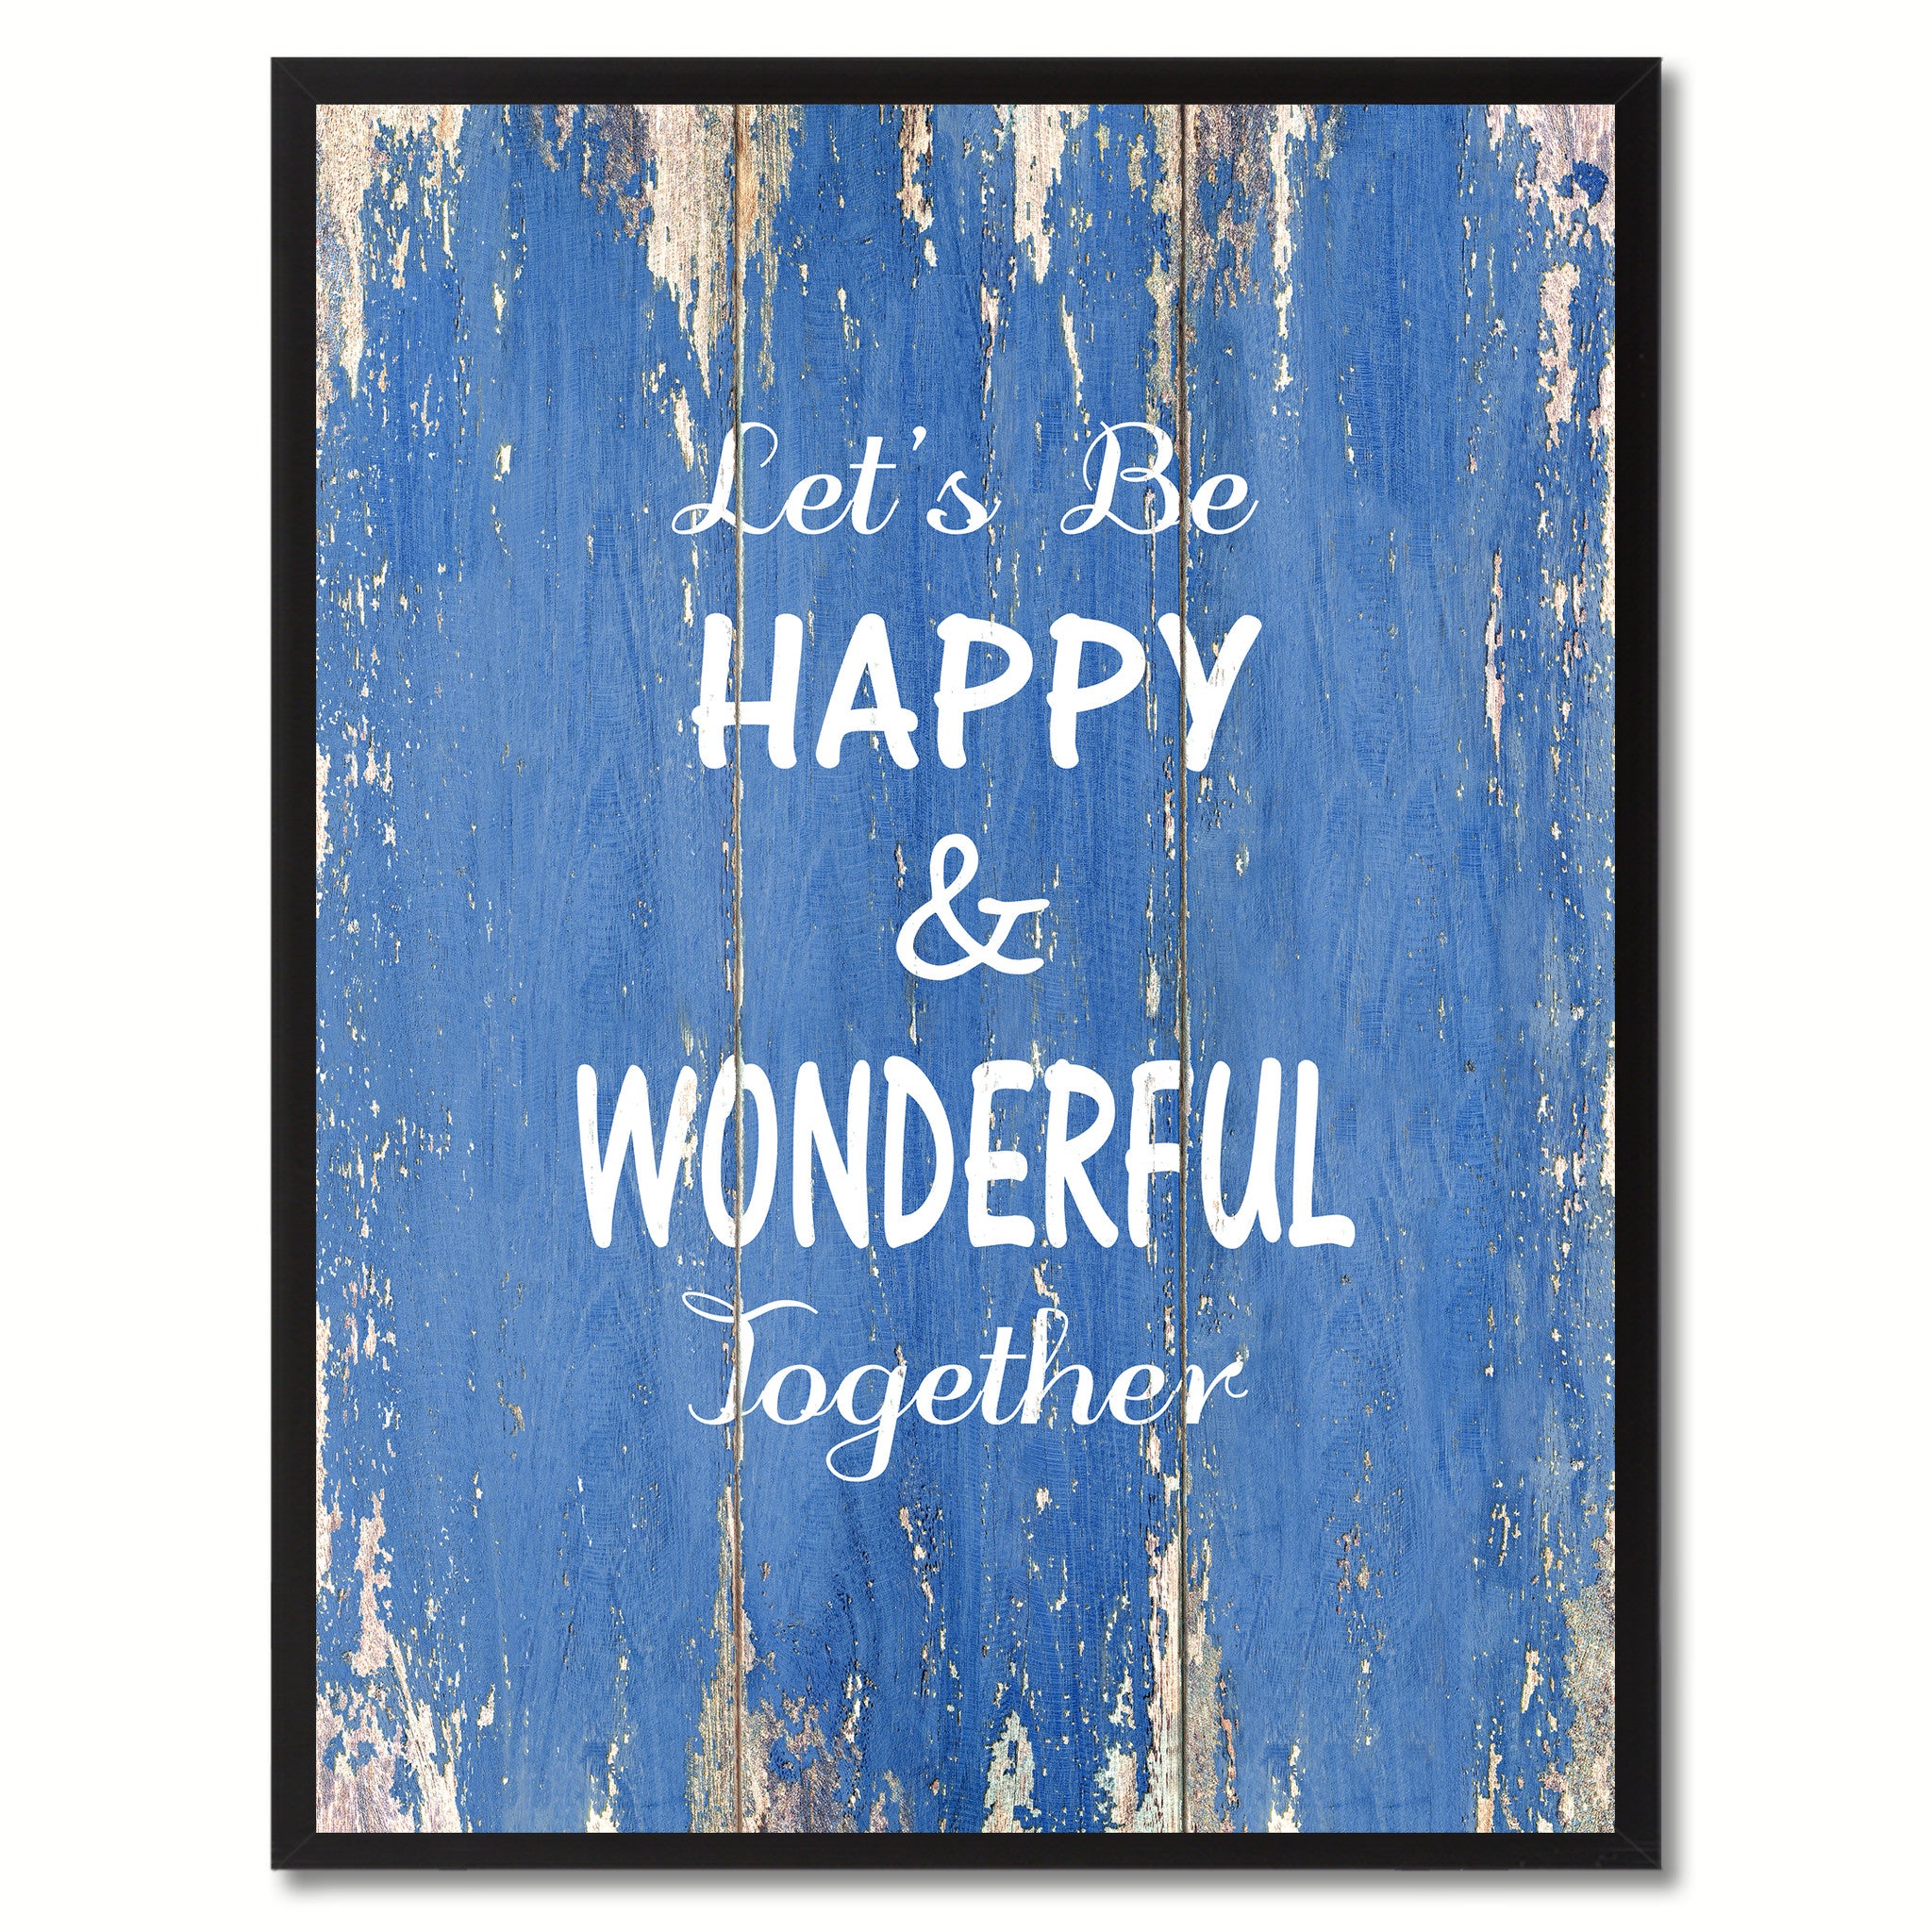 Let's Be Happy & Wonderful Together Saying Canvas Print, Black Picture Frame Home Decor Wall Art Gifts